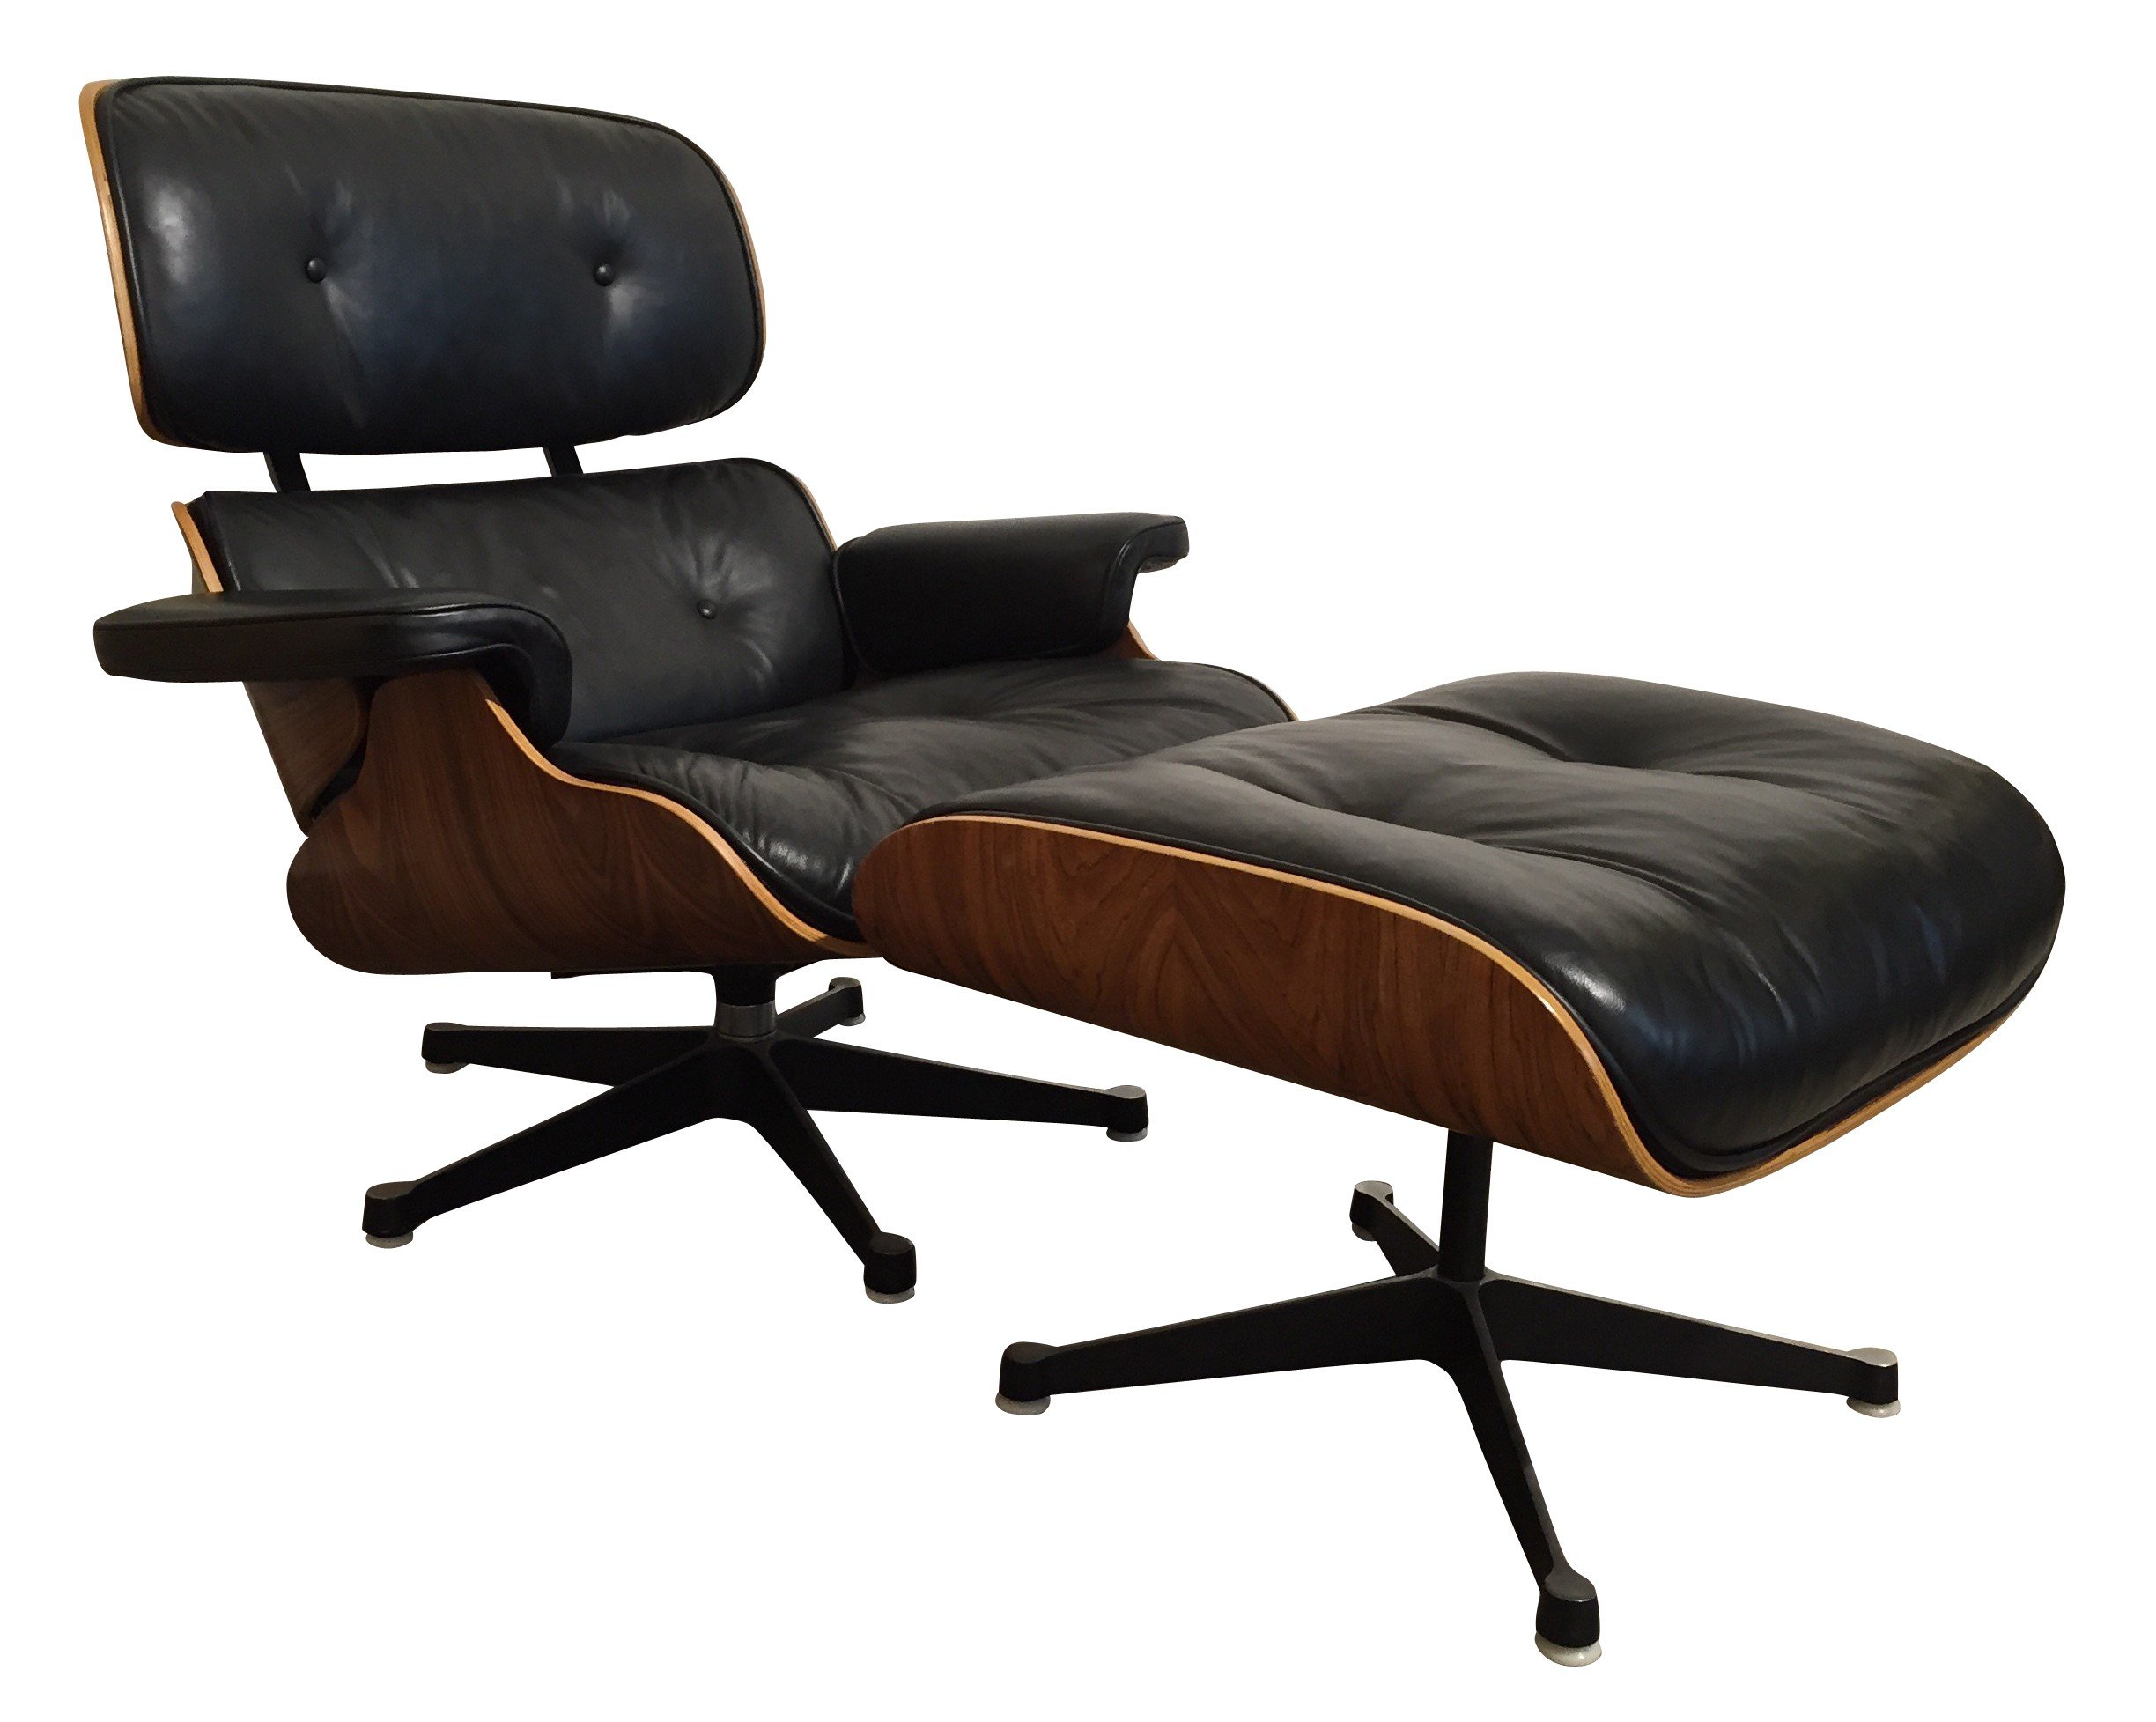 Lounge Chair "670", Charles EAMES - 1970s - Design Market